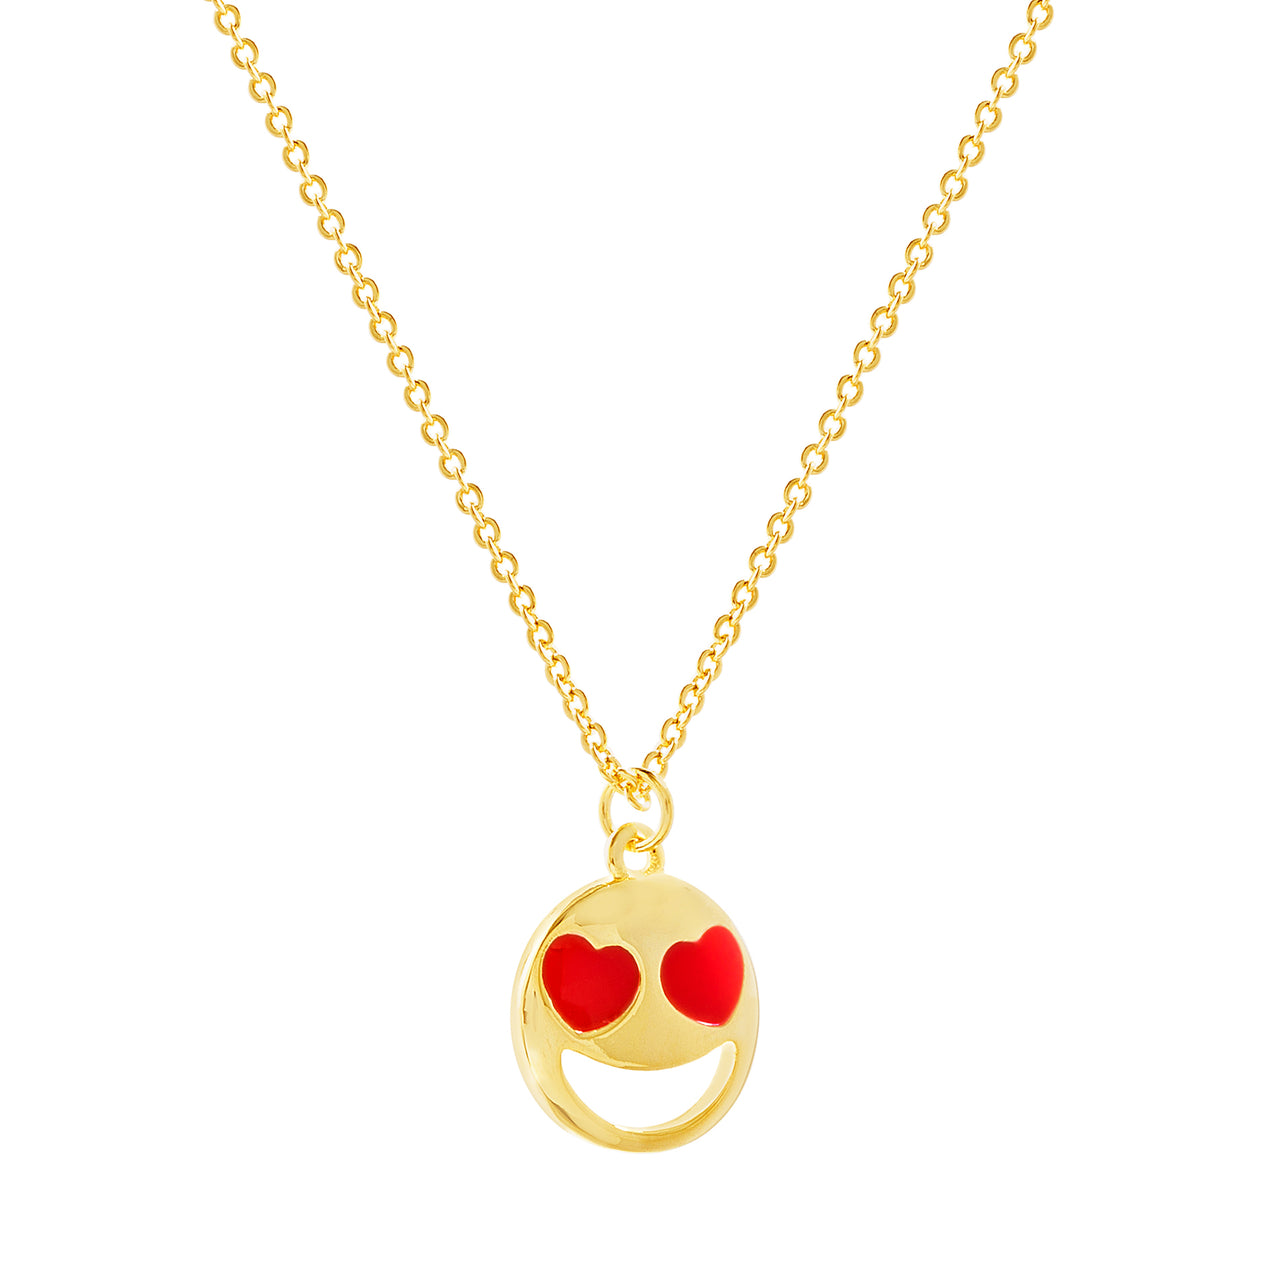 Lesa Michele Yellow Gold Heart Eyes Smiley Face Necklace in Brass